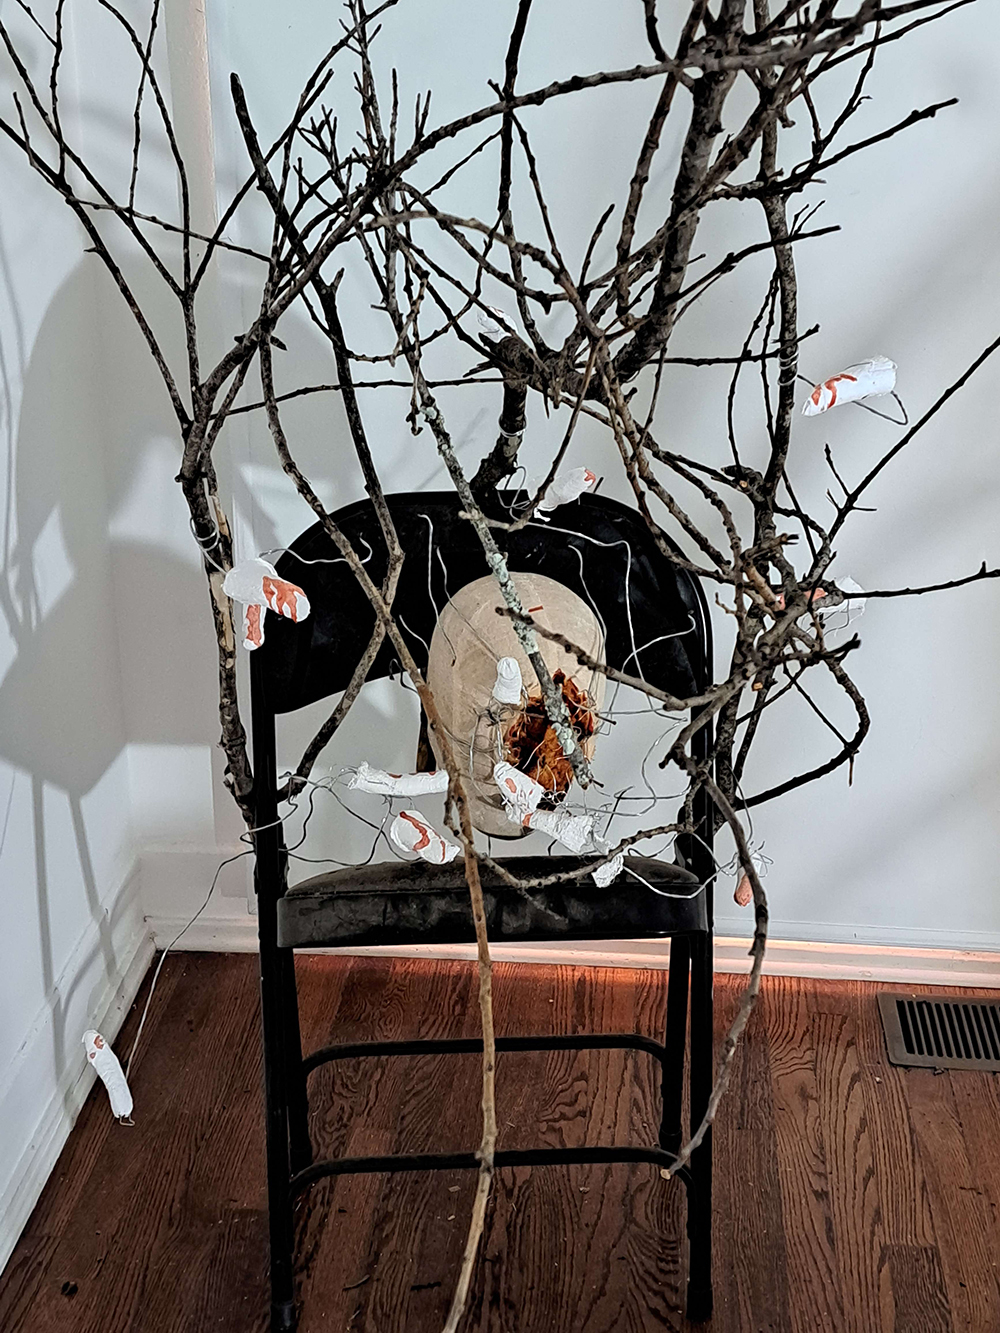 Several sculptures made from objects obtained from various places I frequent, tree branches, and finger molds working in conjunction with one another to create a piece. 